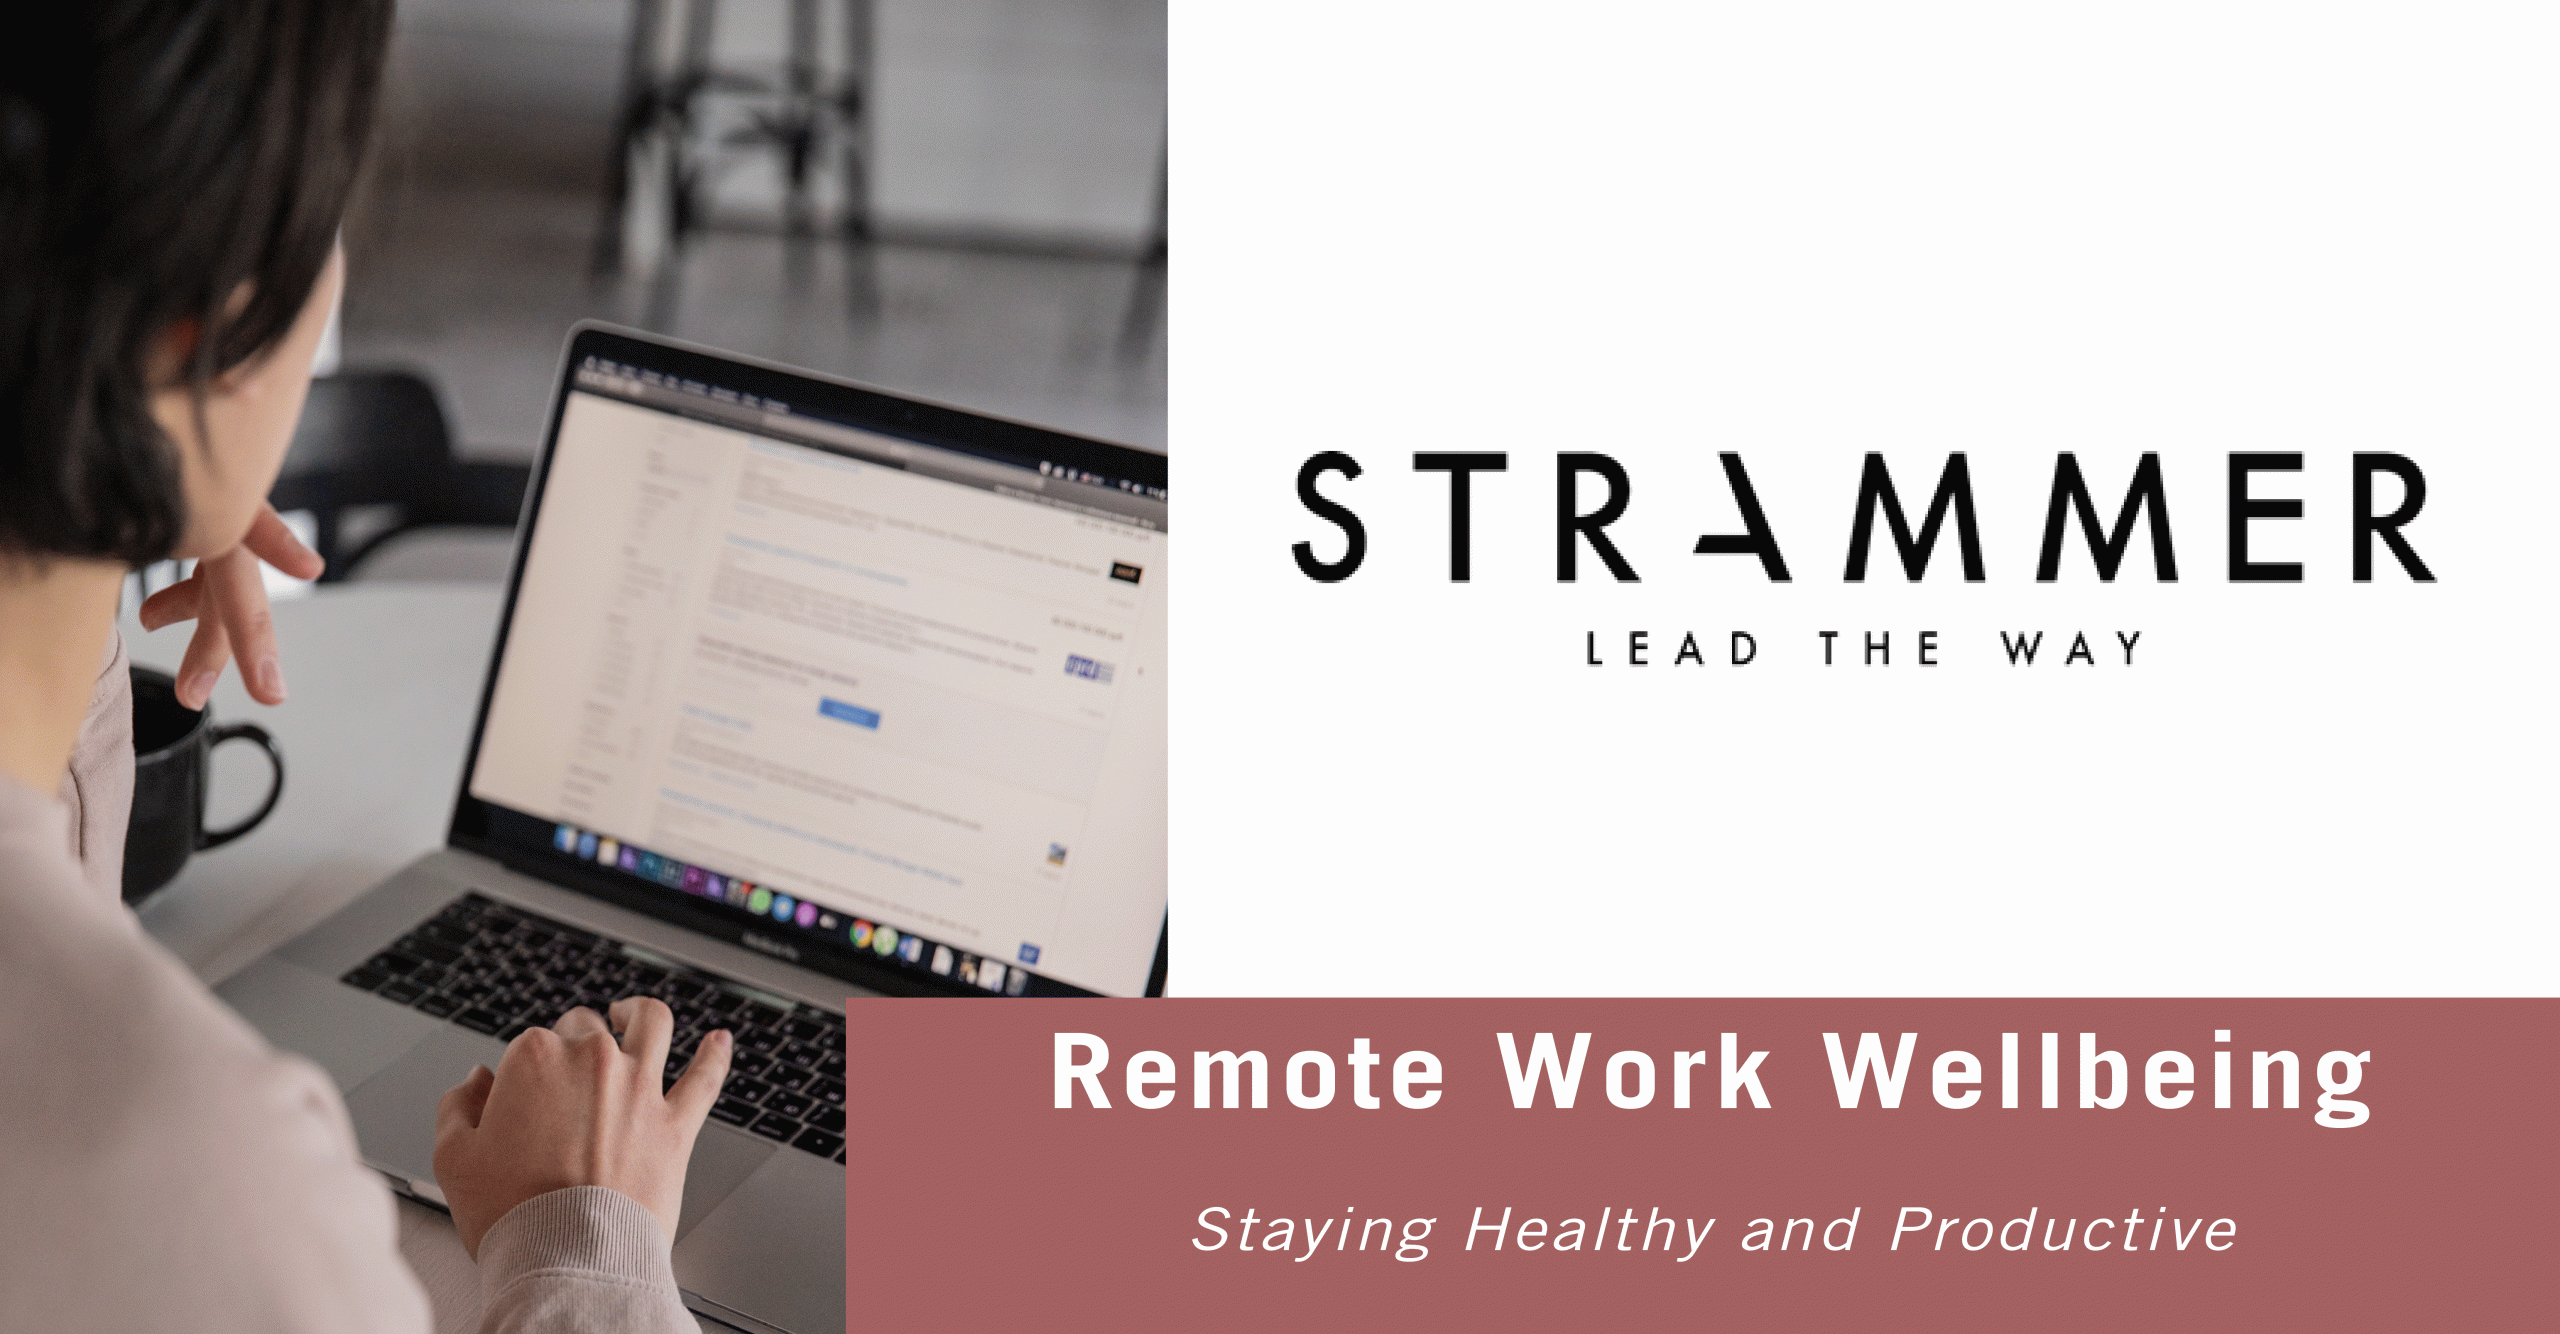 Staying Healthy and Productive in Remote Work